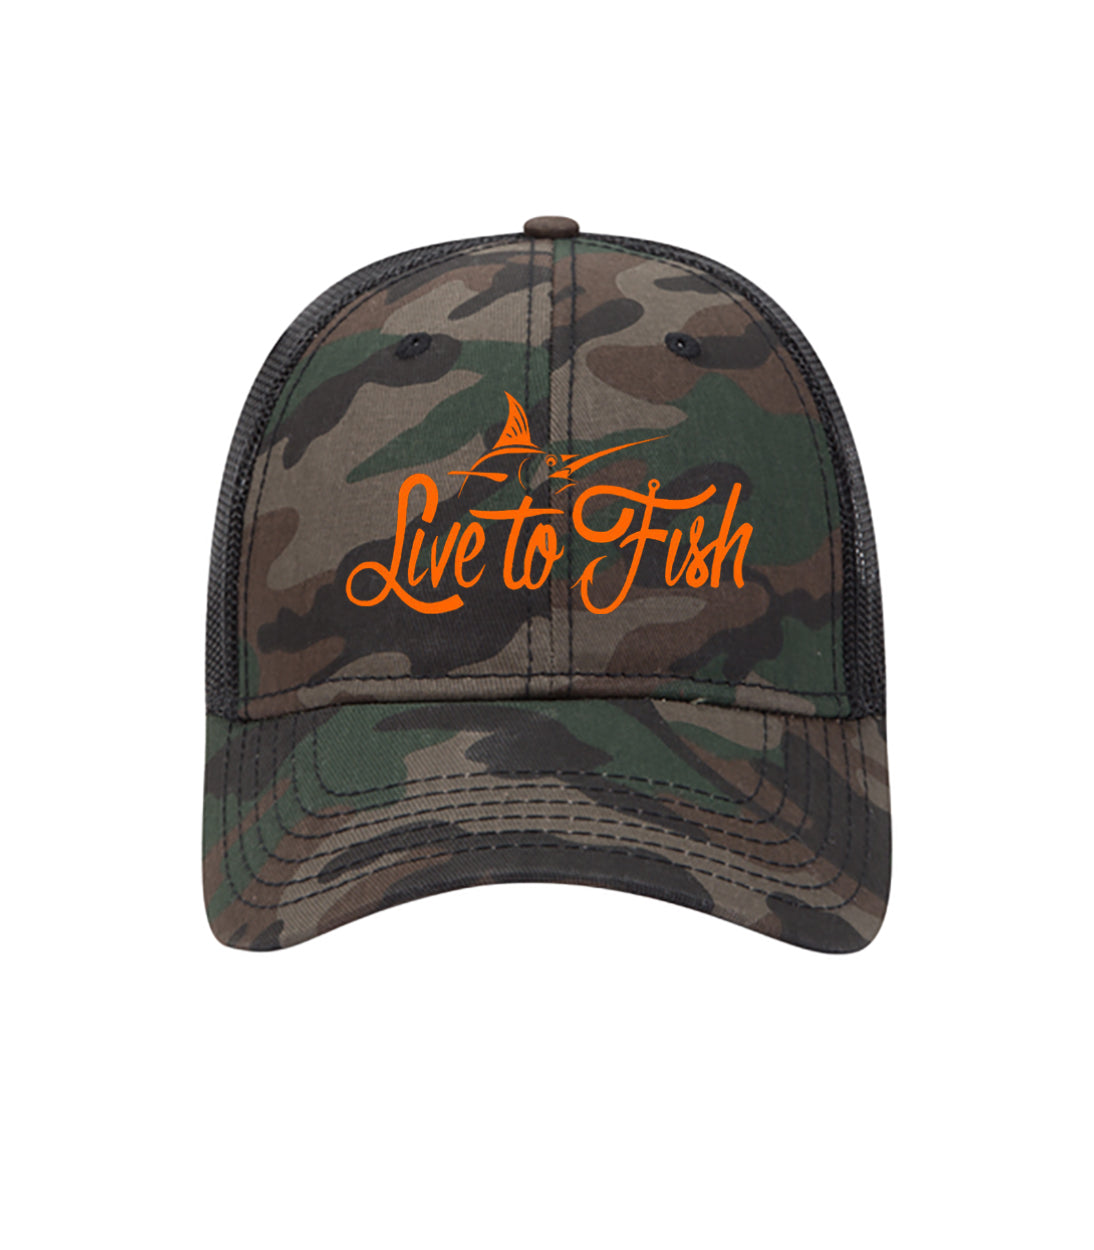 Live to Fish Marlin Camo Orange Embroidered 6 Panel Cotton Twill Pro-Style Snap Back Trucker Hat